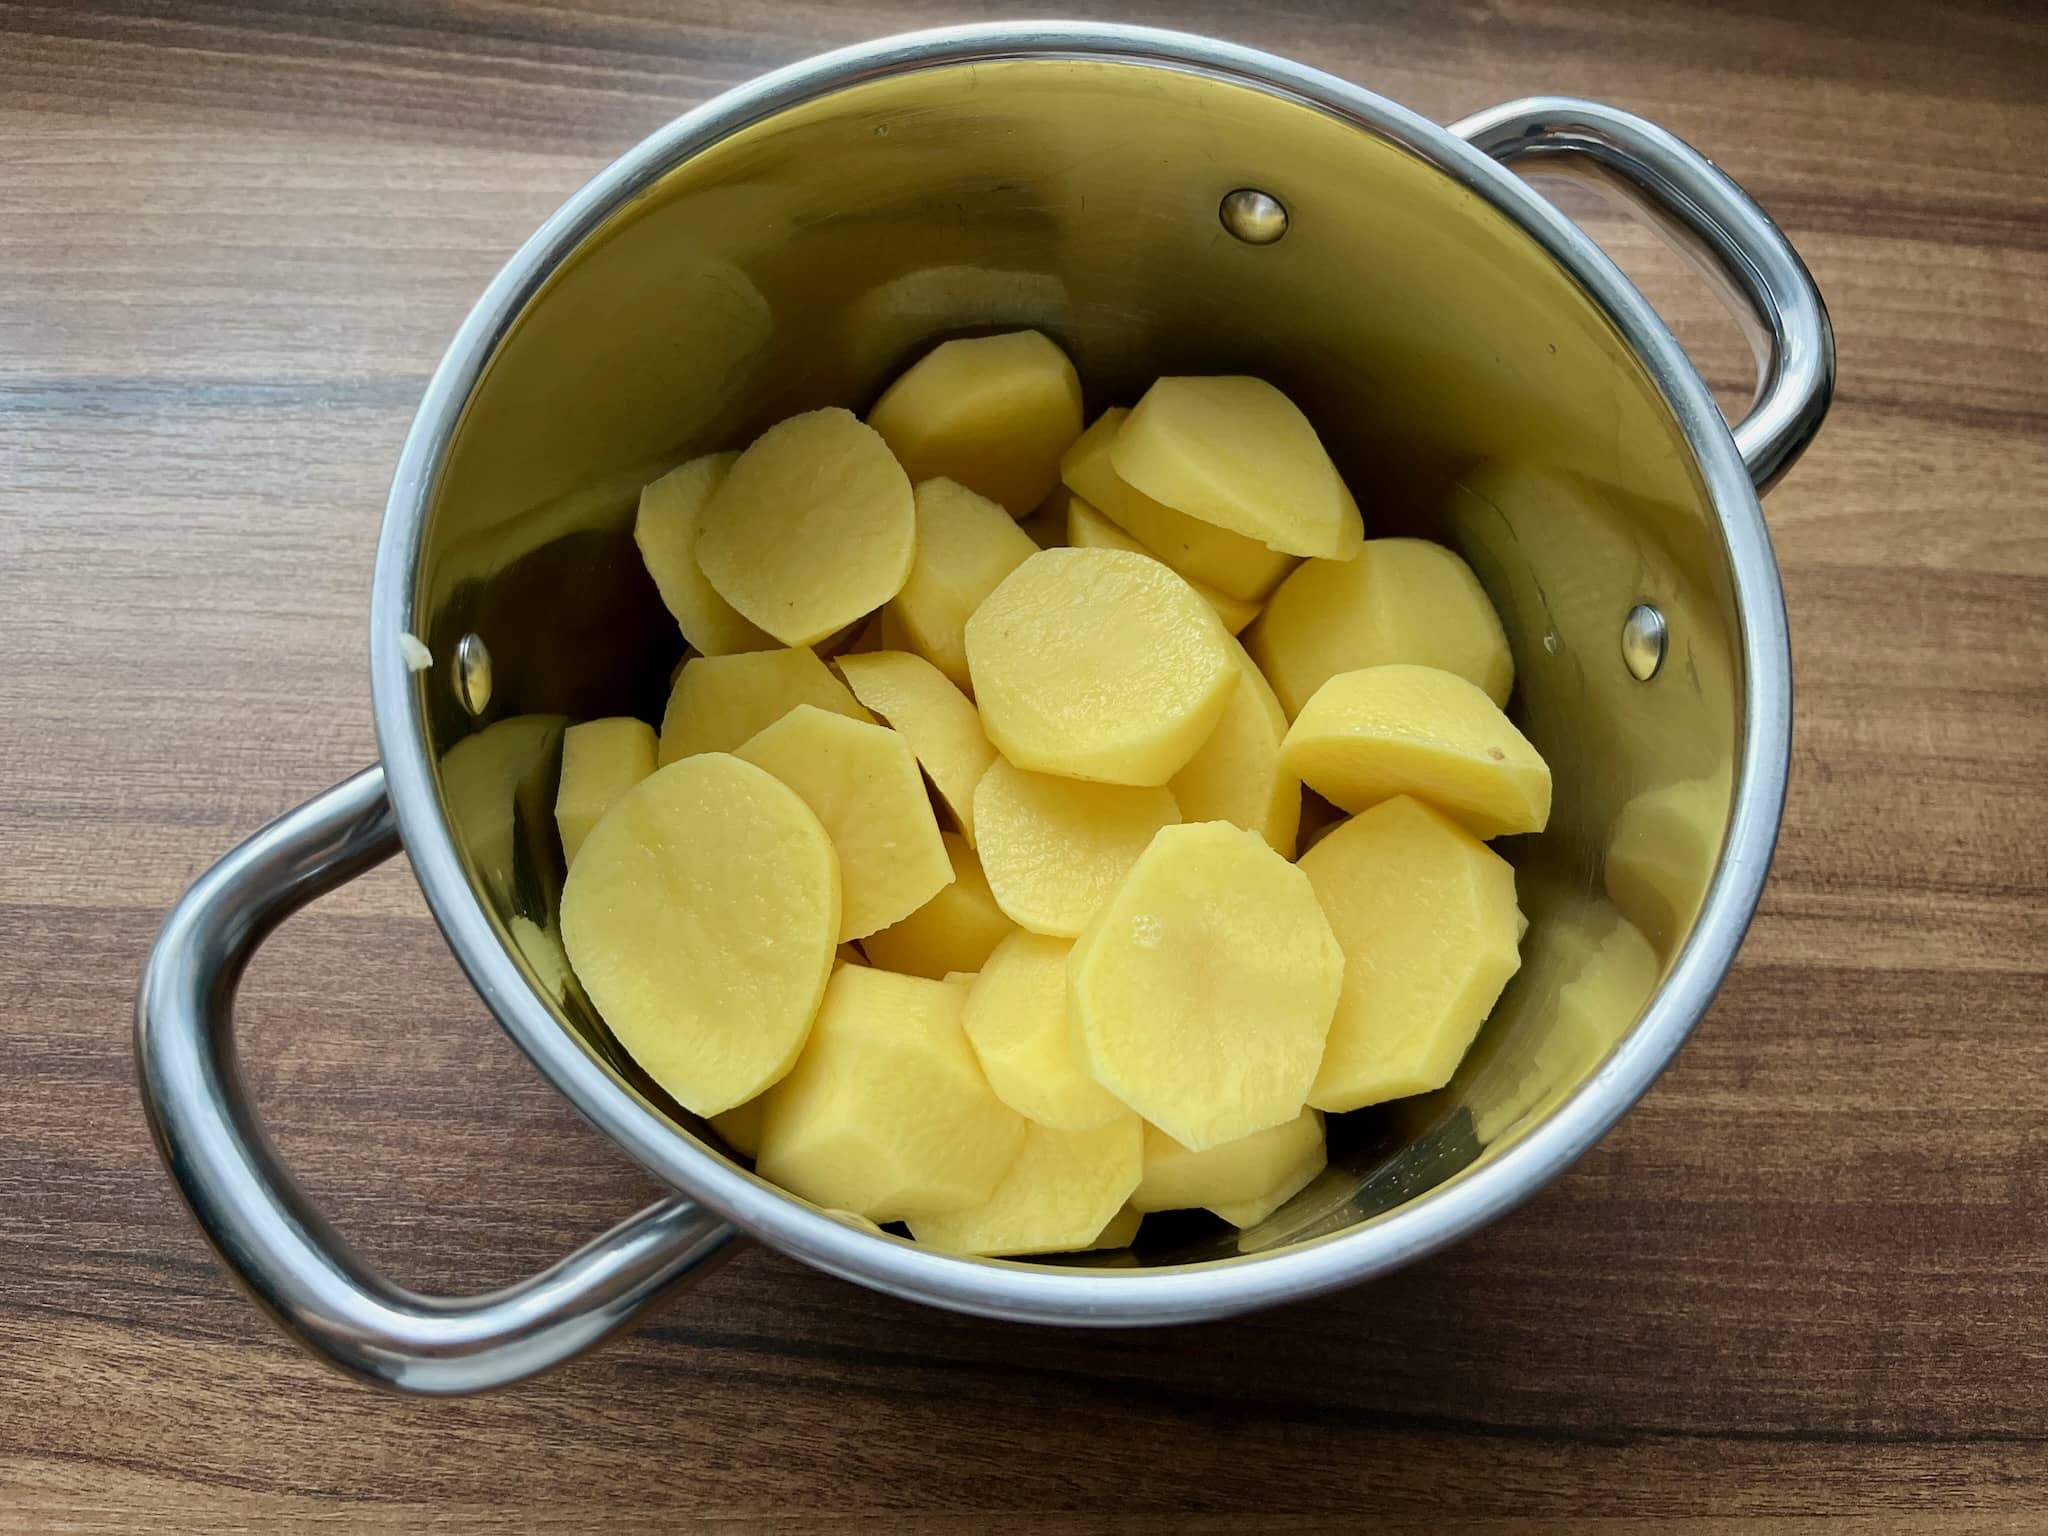 Potatoes slices in a pan before cooking